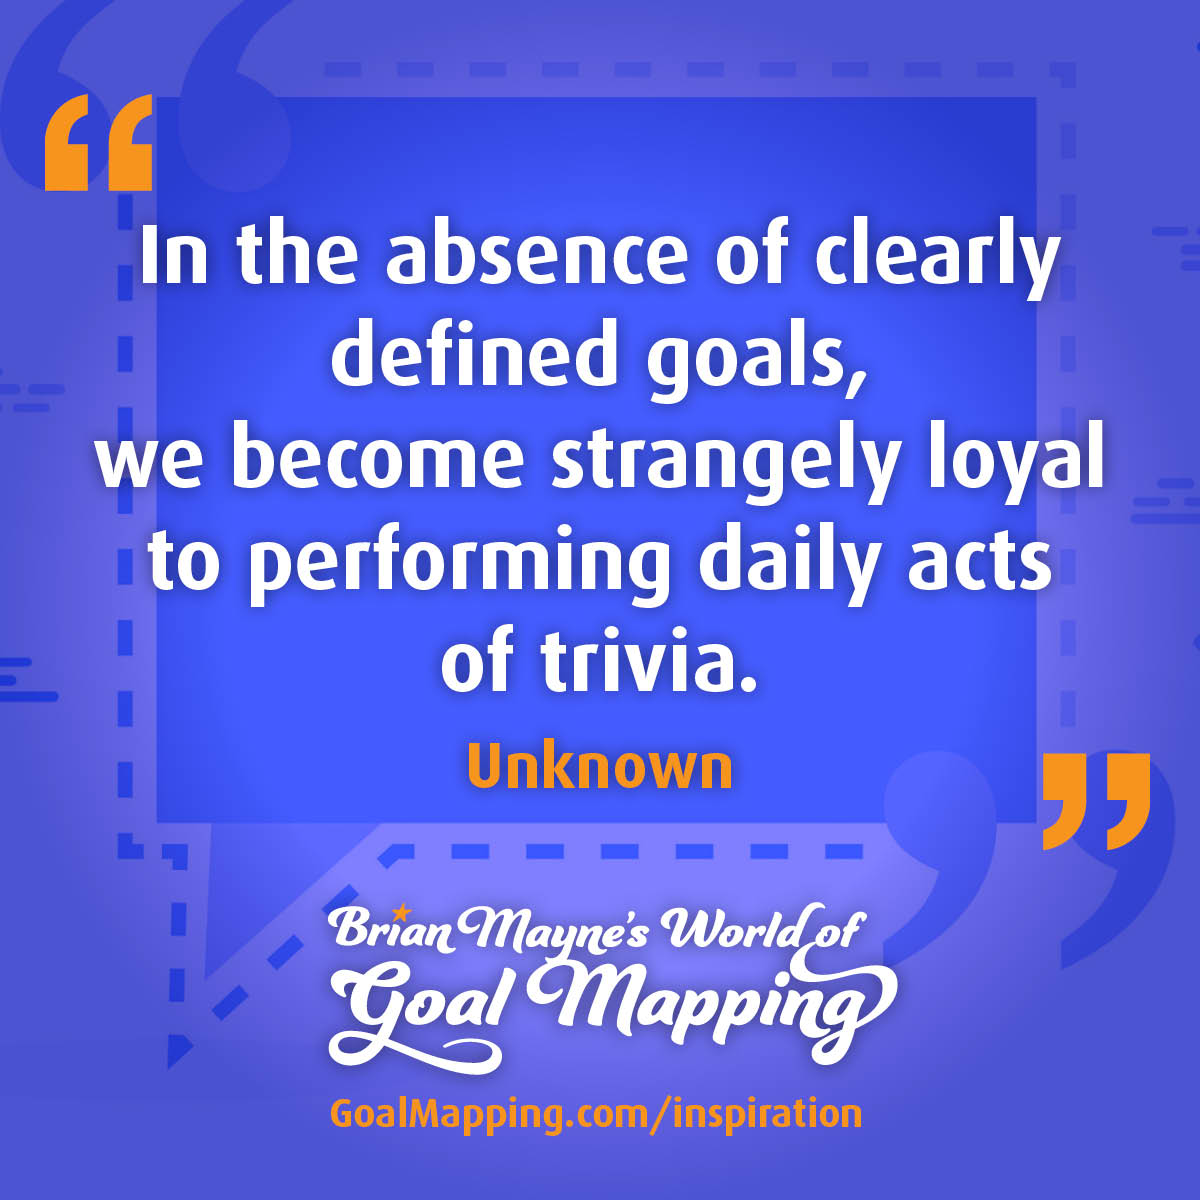 "In the absence of clearly defined goals, we become strangely loyal to performing daily acts of trivia." Unknown